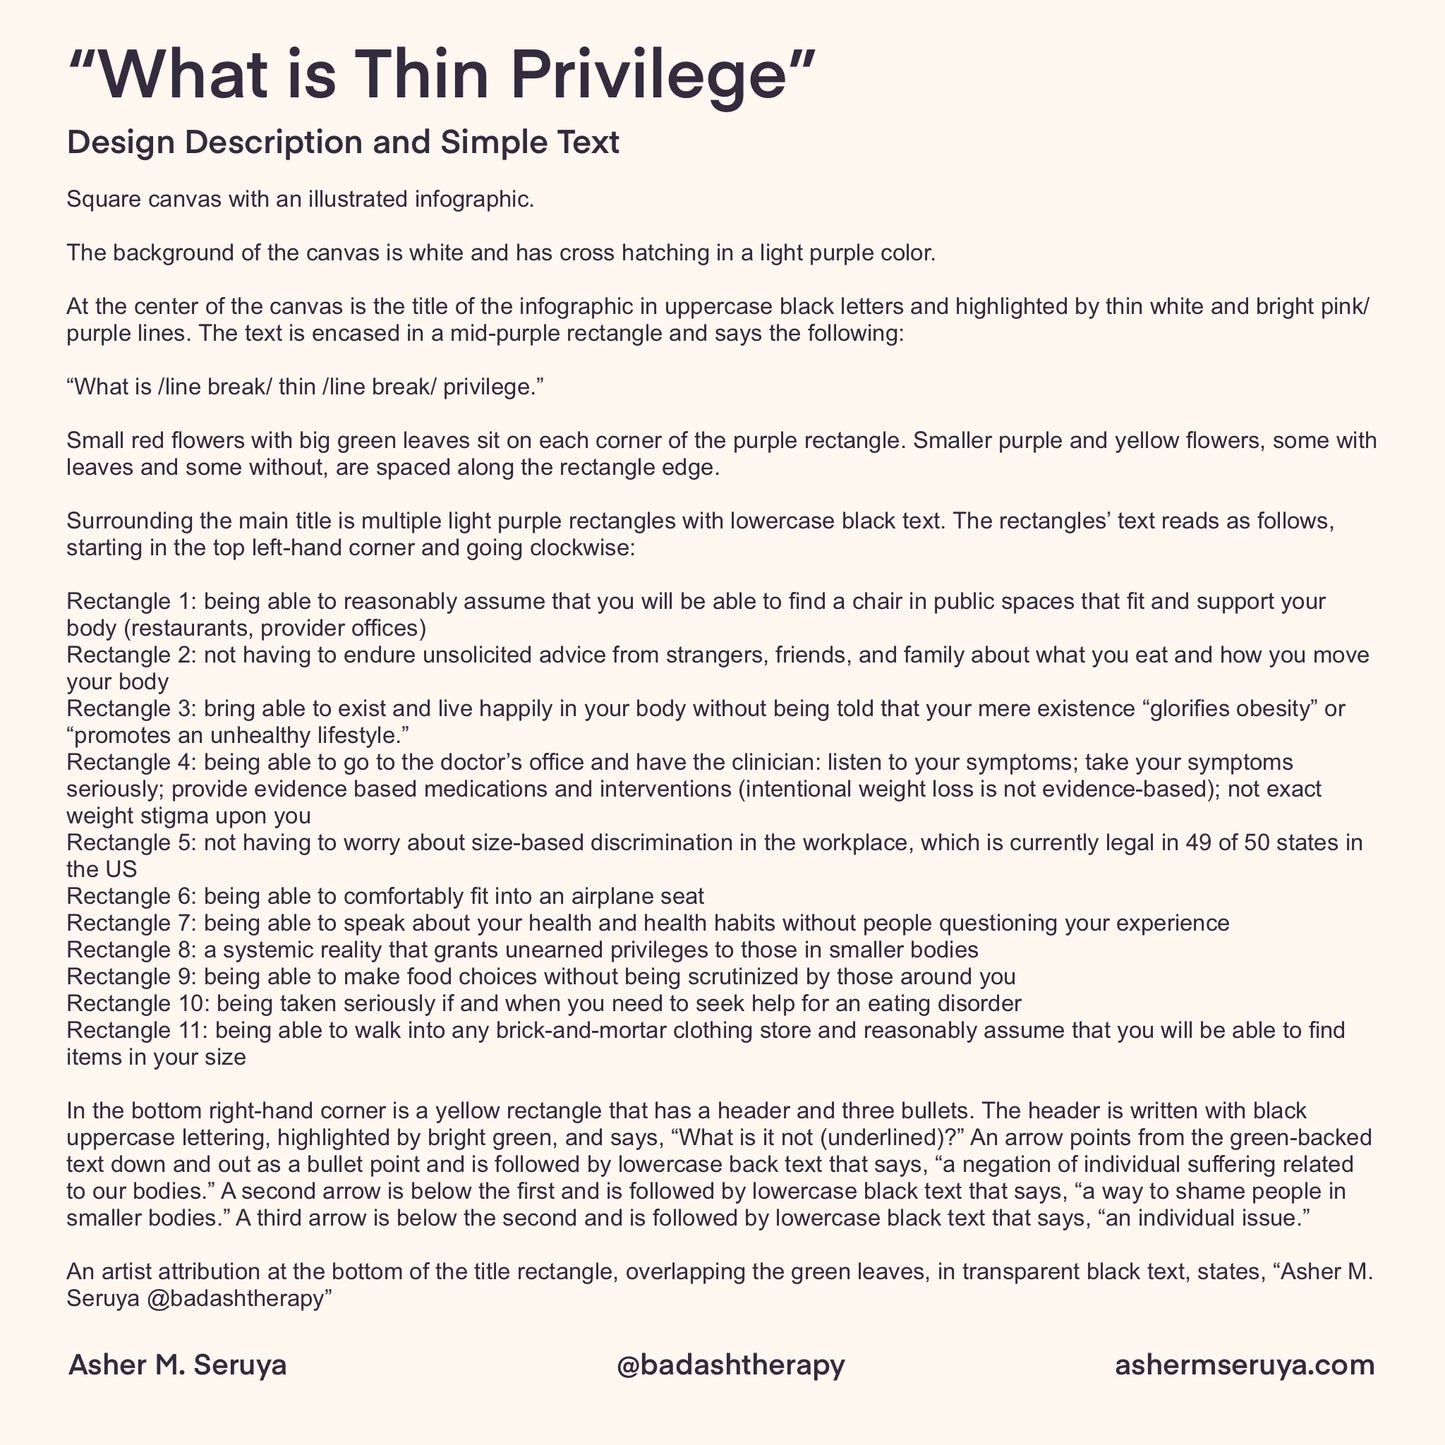 What is Thin Privilege Digital Artwork - Illustrated Infographic